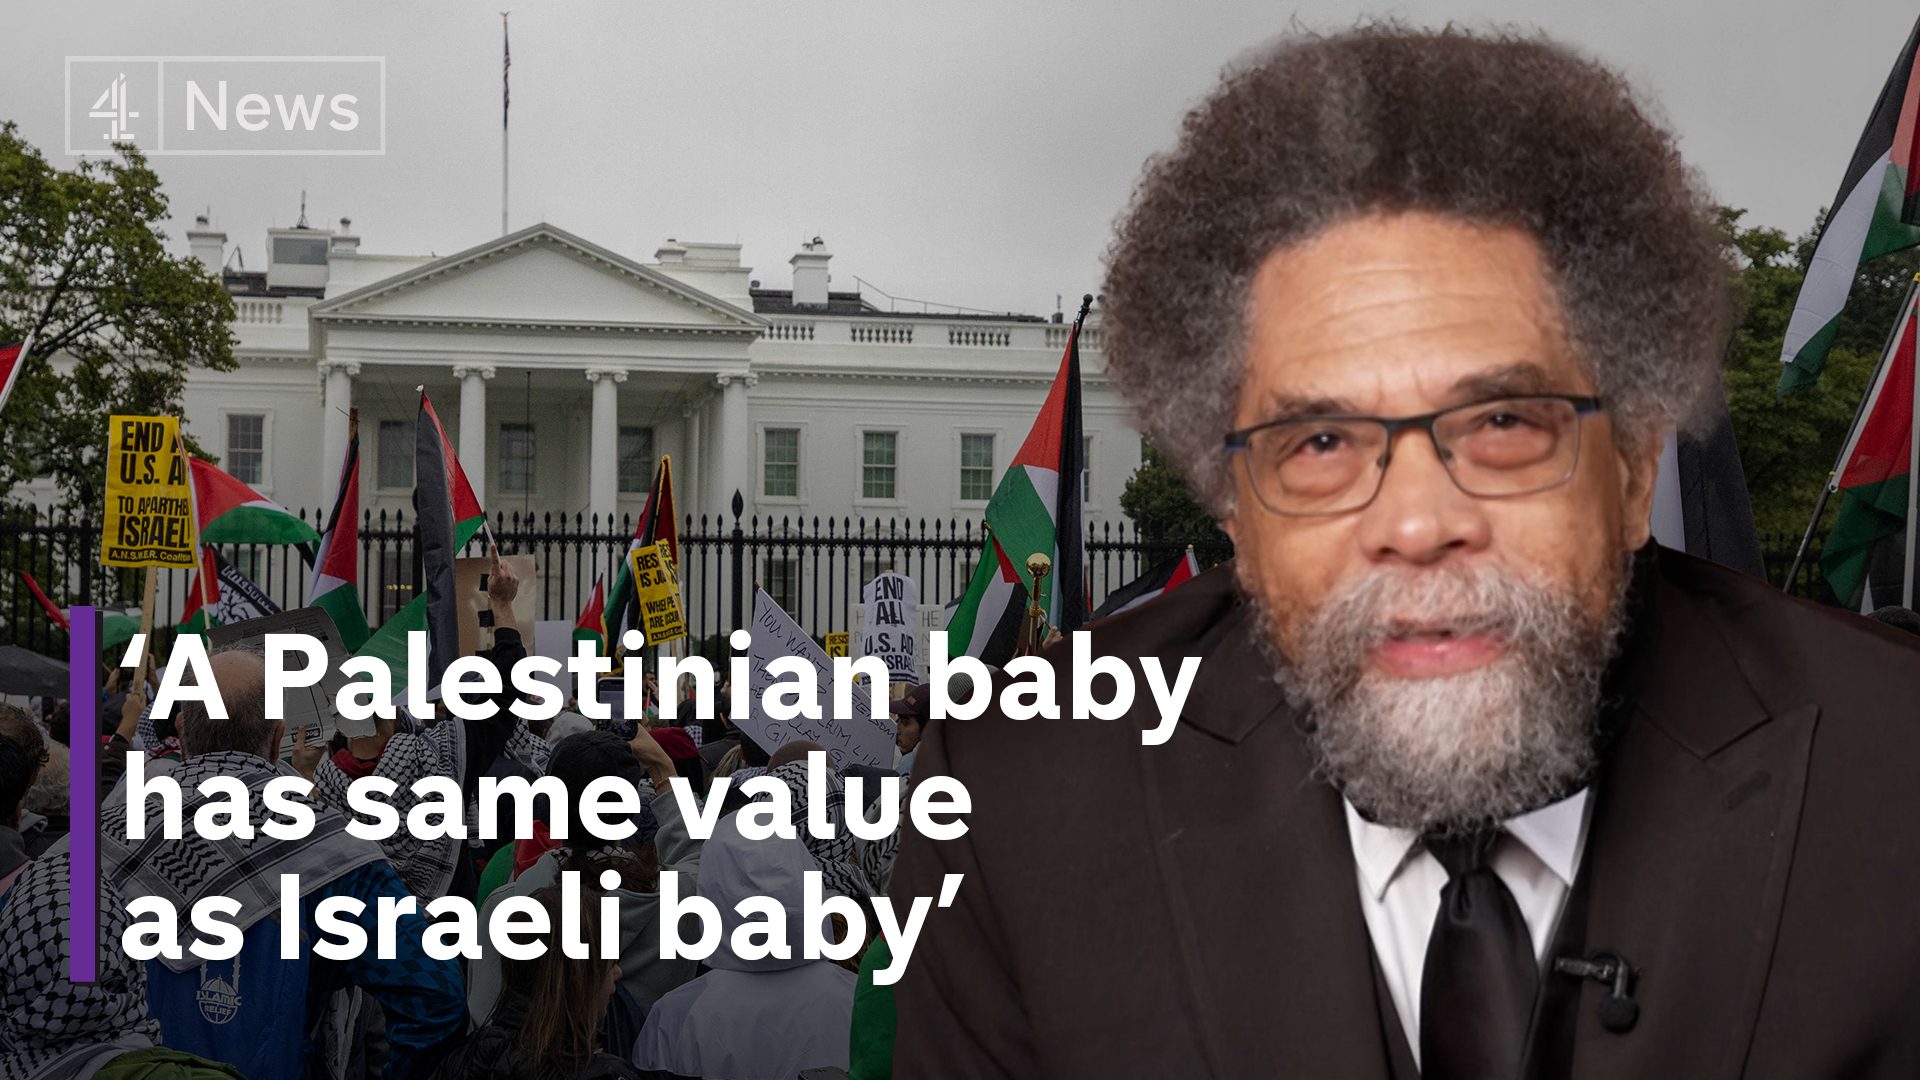 US Presidential candidate Cornel West on Israel Hamas war, greedy ruling class and Biden vs Trump  Channel 4 News [Video]